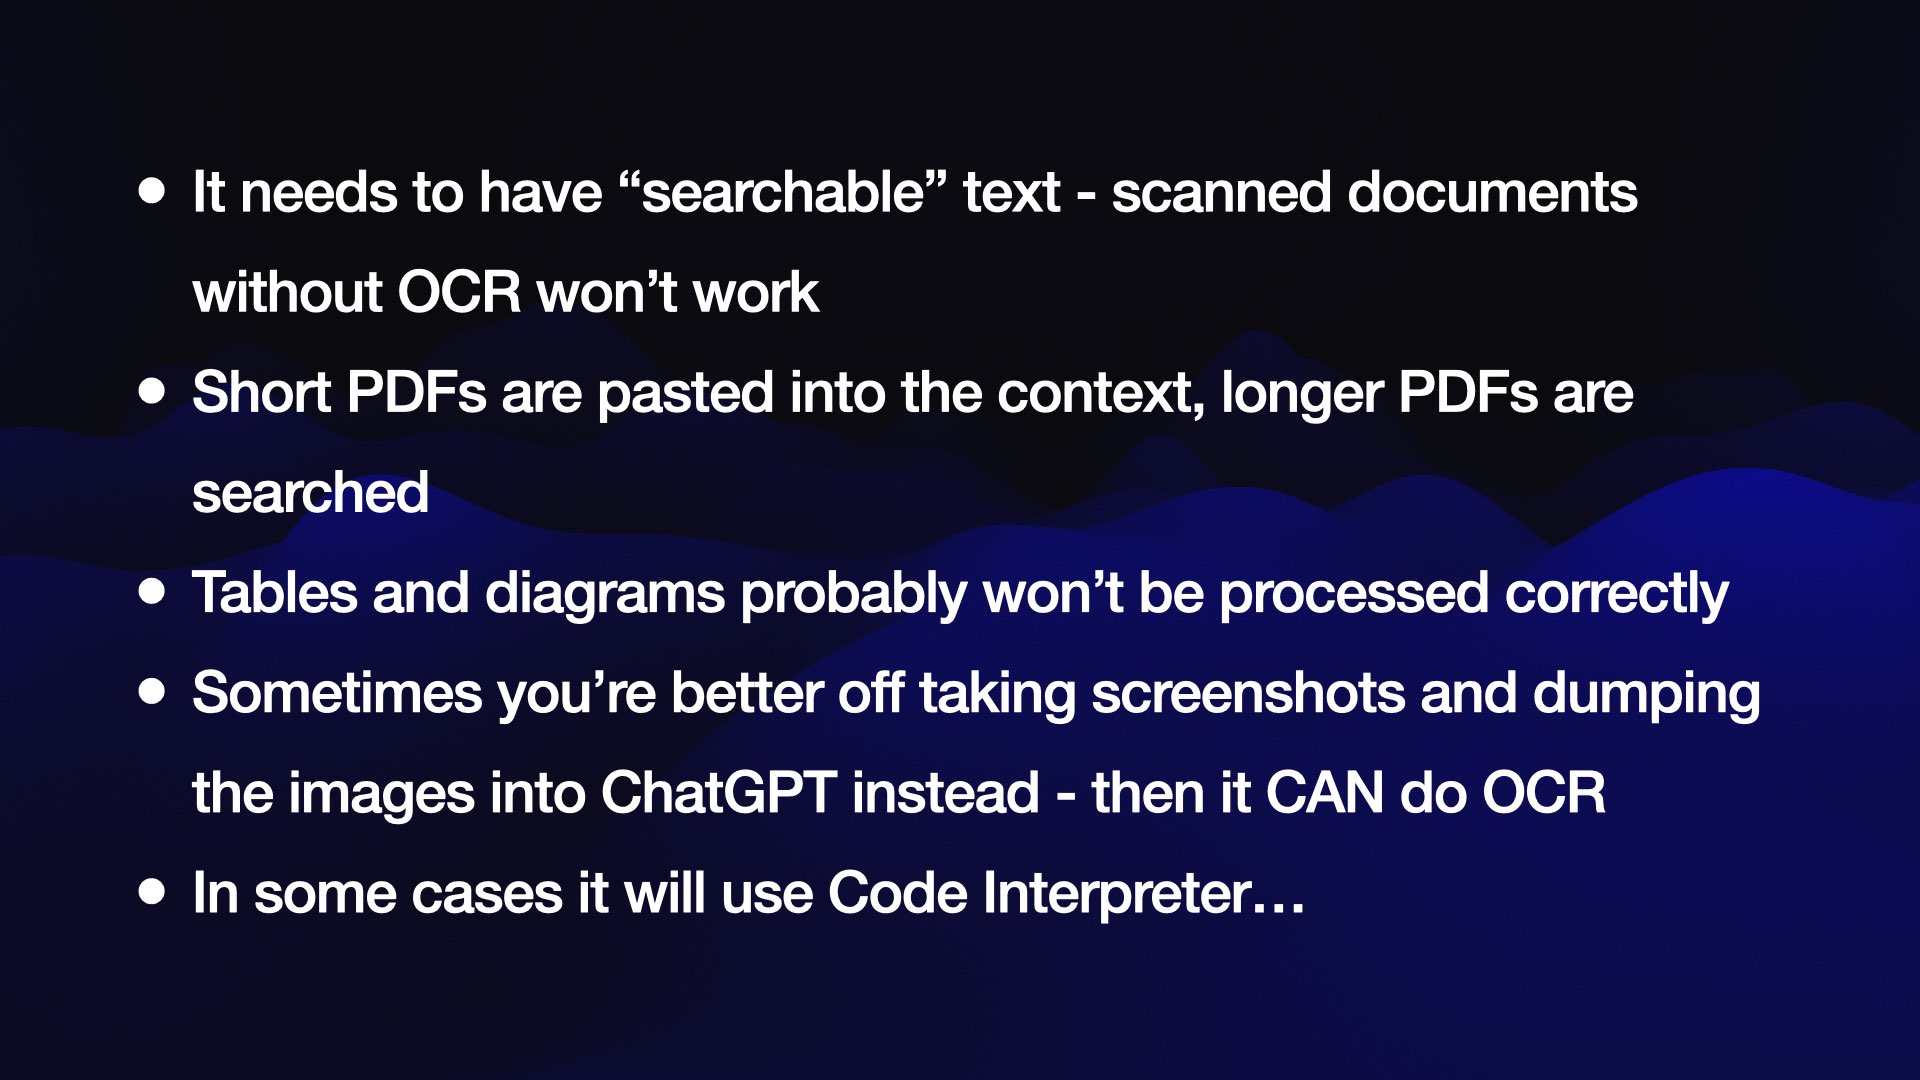 It needs to have “searchable” text - scanned documents without OCR won’t work Short PDFs are pasted into the context, longer PDFs are searched Tables and diagrams probably won’t be processed correctly Sometimes you’re better off taking screenshots and dumping the images into ChatGPT instead - then it CAN do OCR In some cases it will use Code Interpreter…